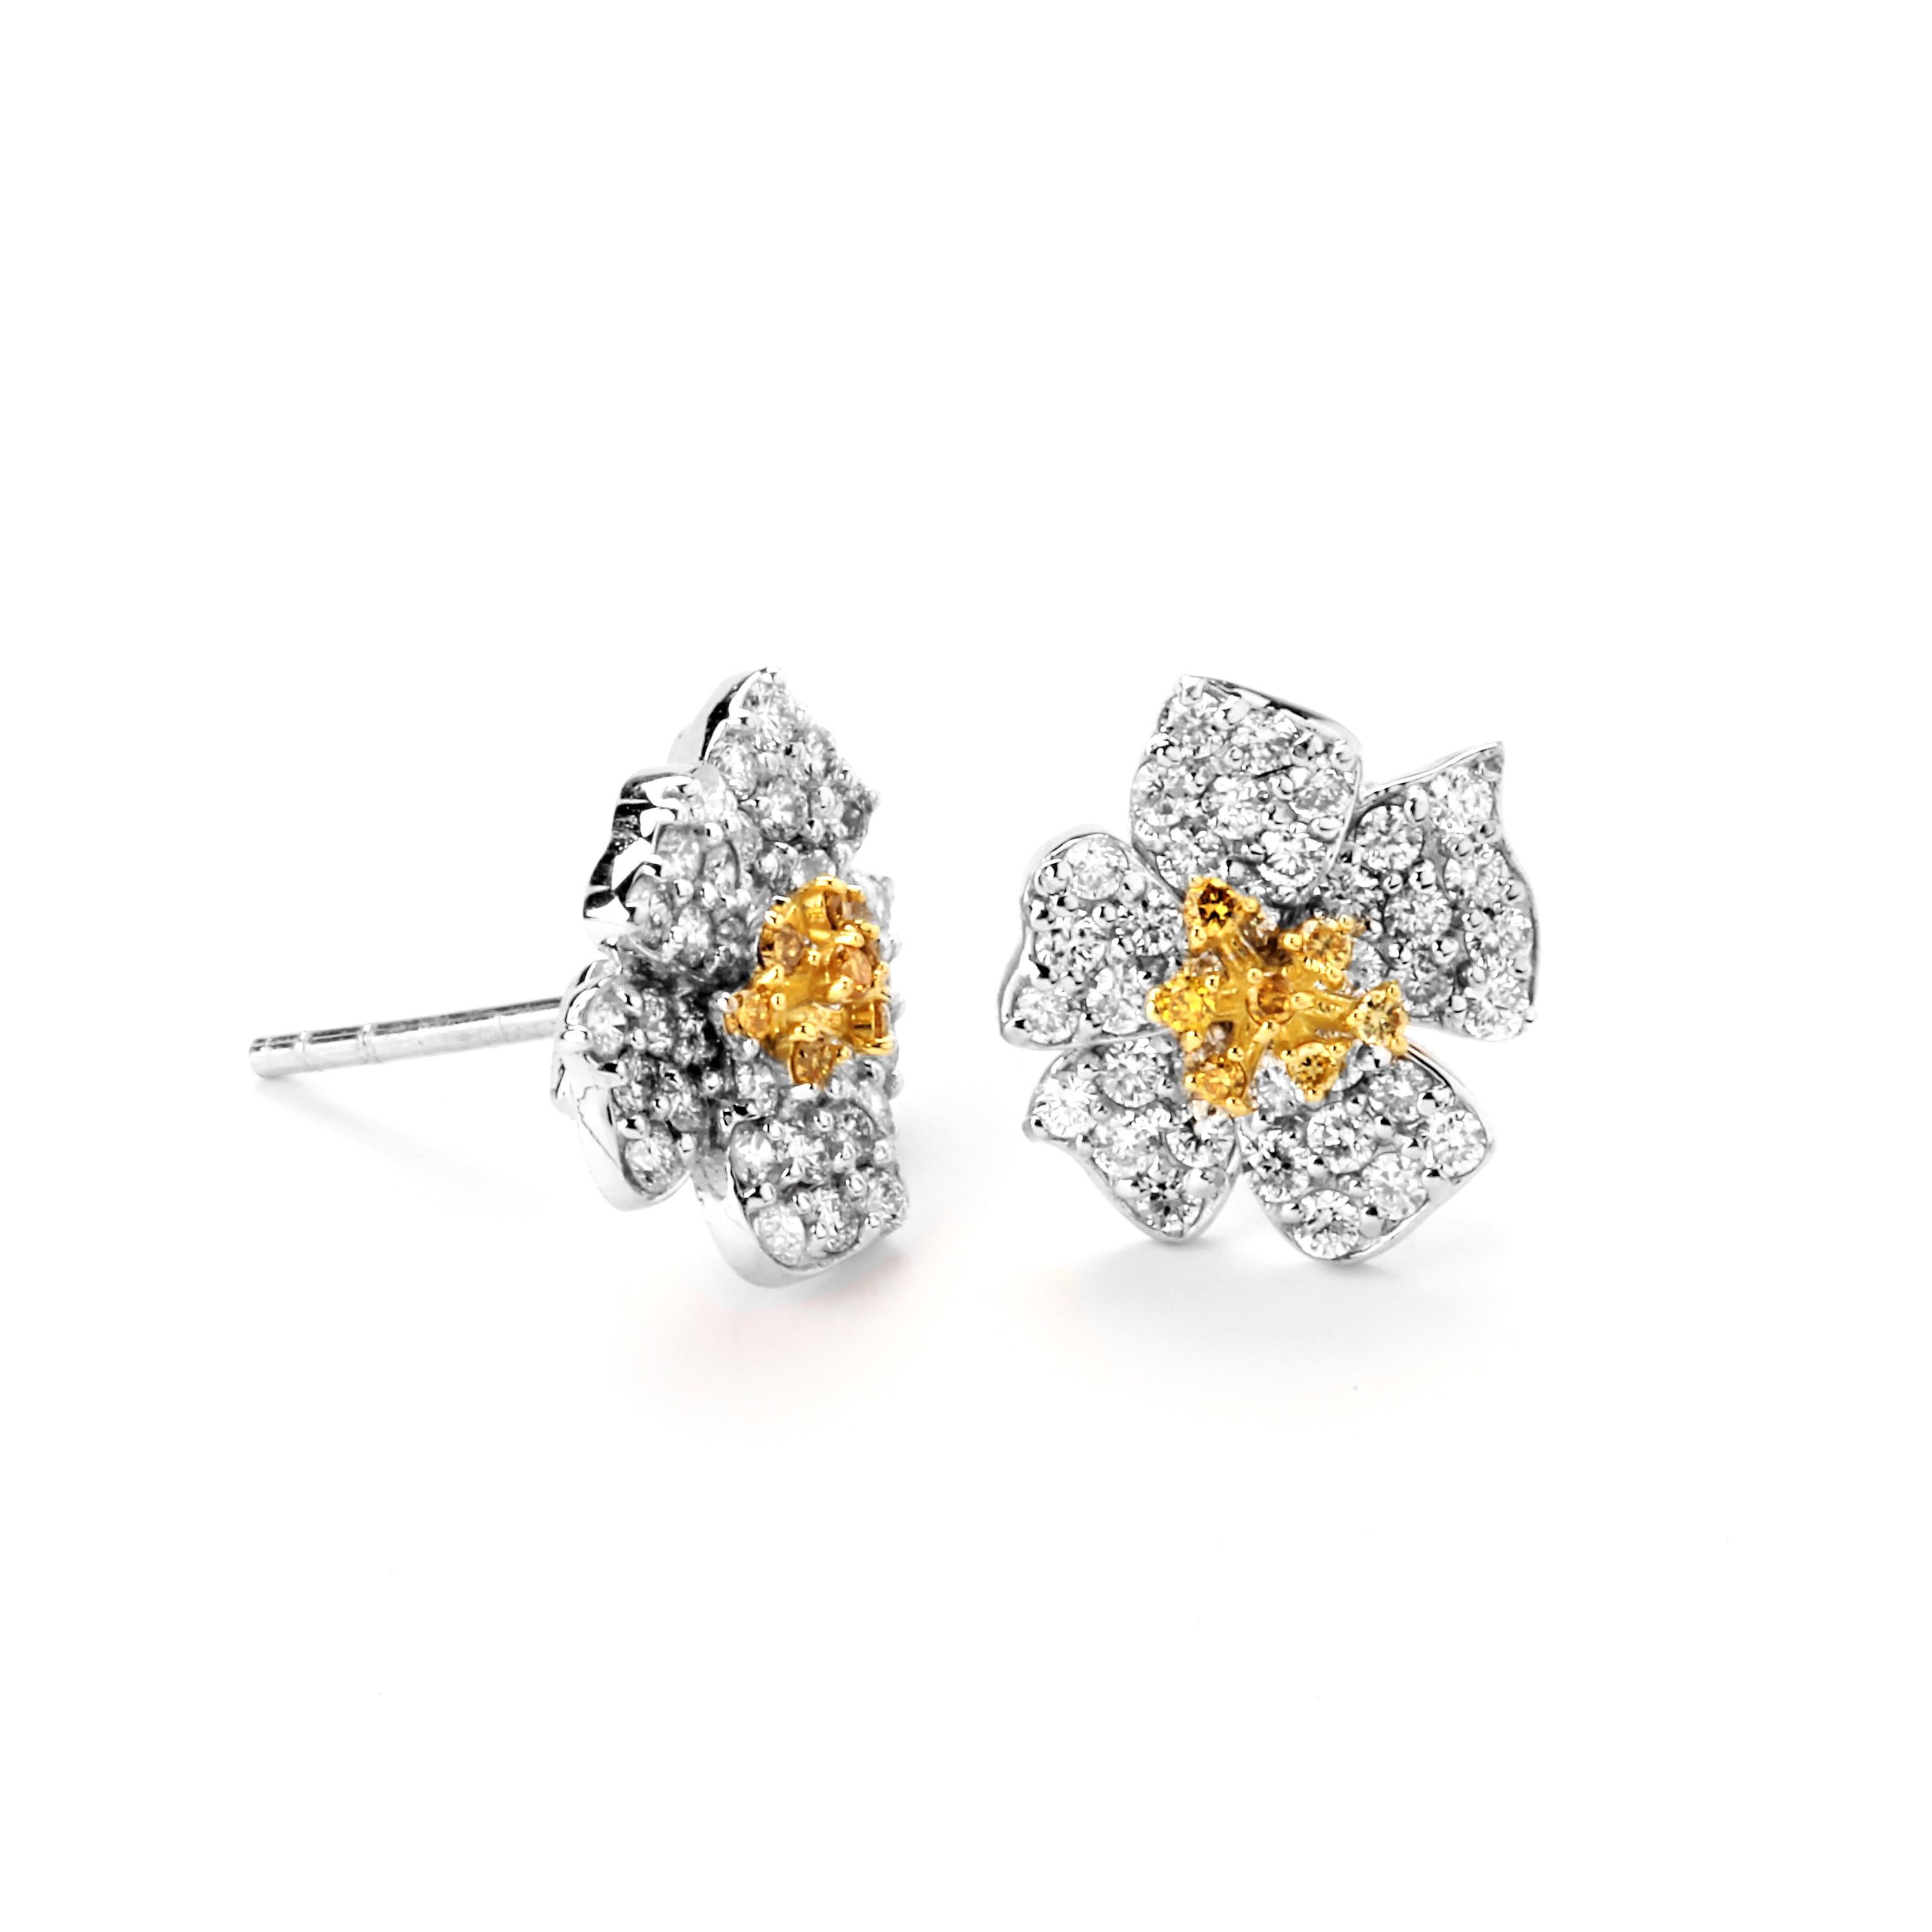 Stambolian 18K Gold Fancy Yellow and White Diamond Flower Stud Earrings

NO RESERVE PRICE

These floral earrings are from the 